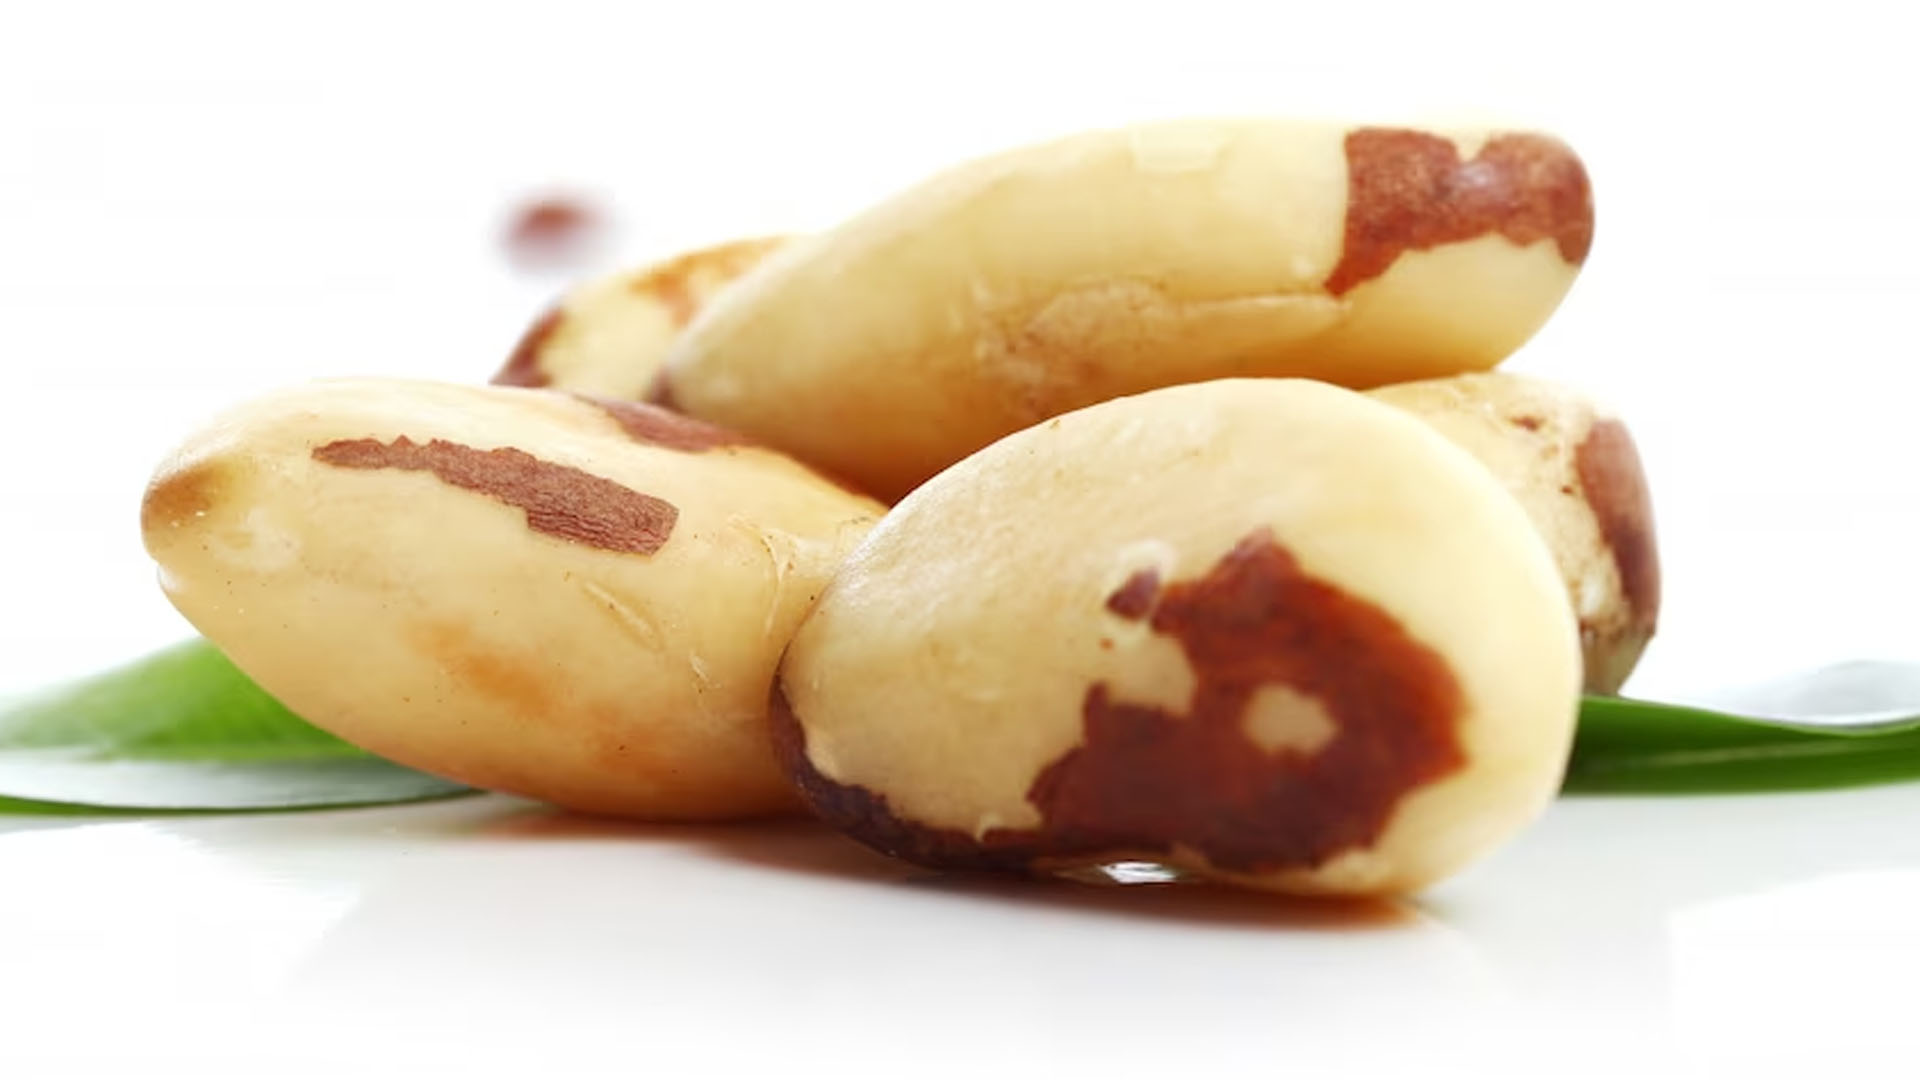 What Are The Health Benefits Of Brazil Nuts?